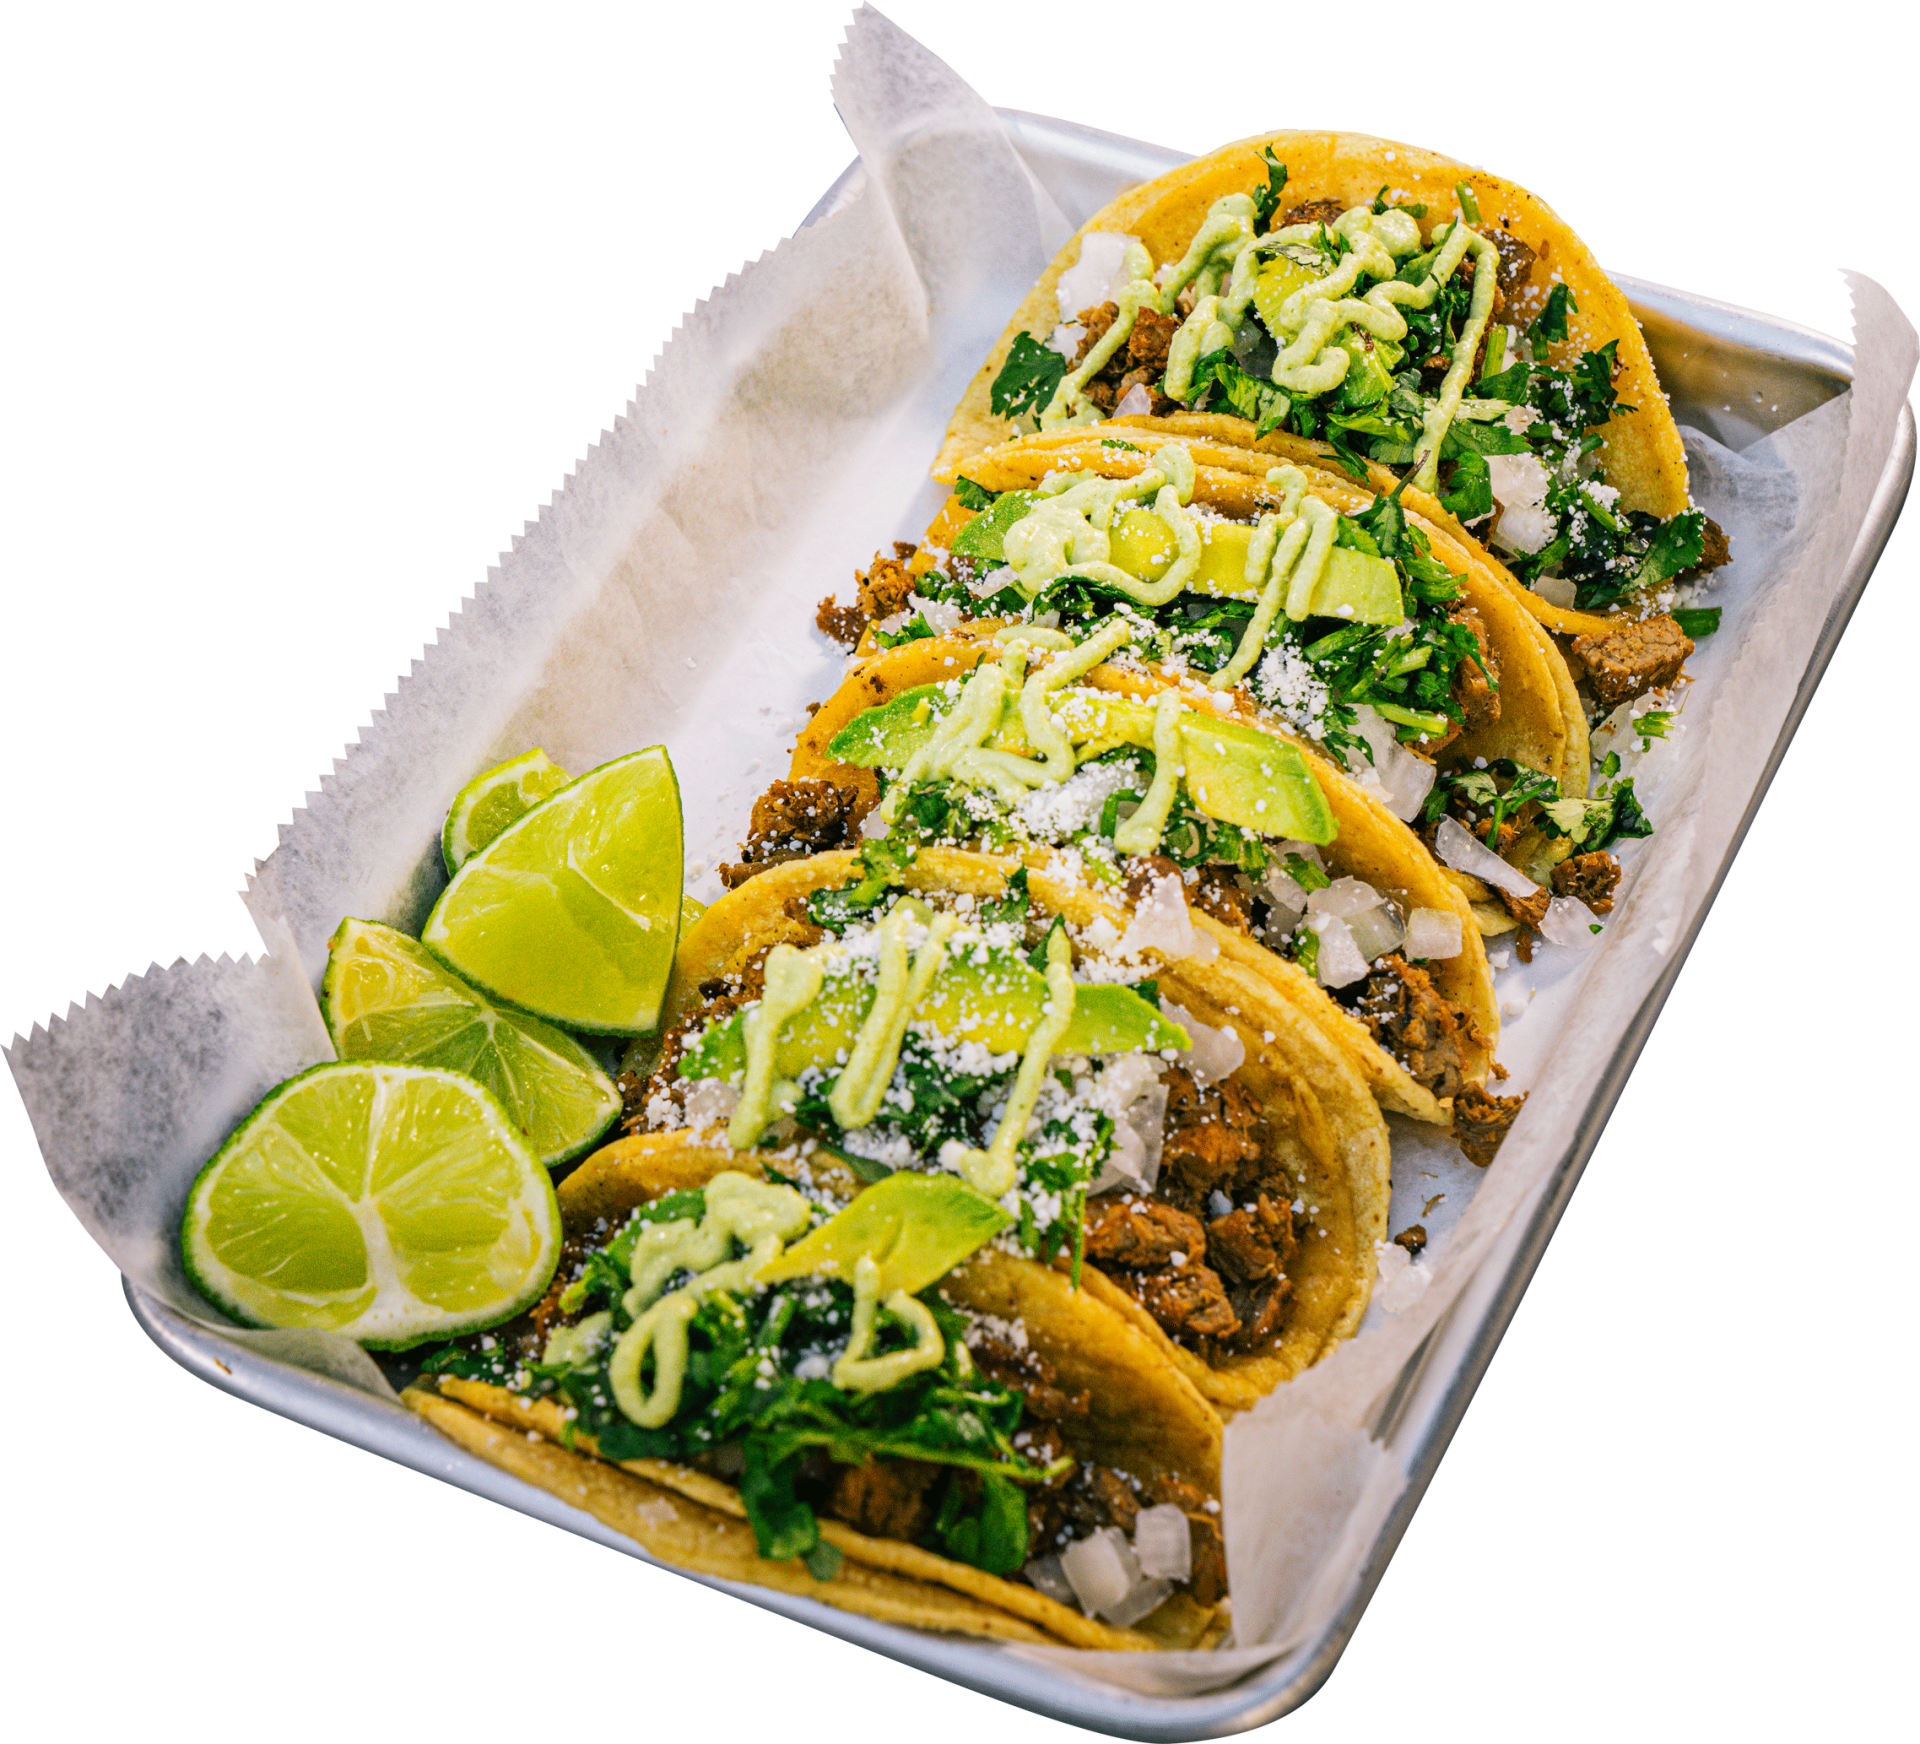 A tray of tacos with limes and avocado on a white background.